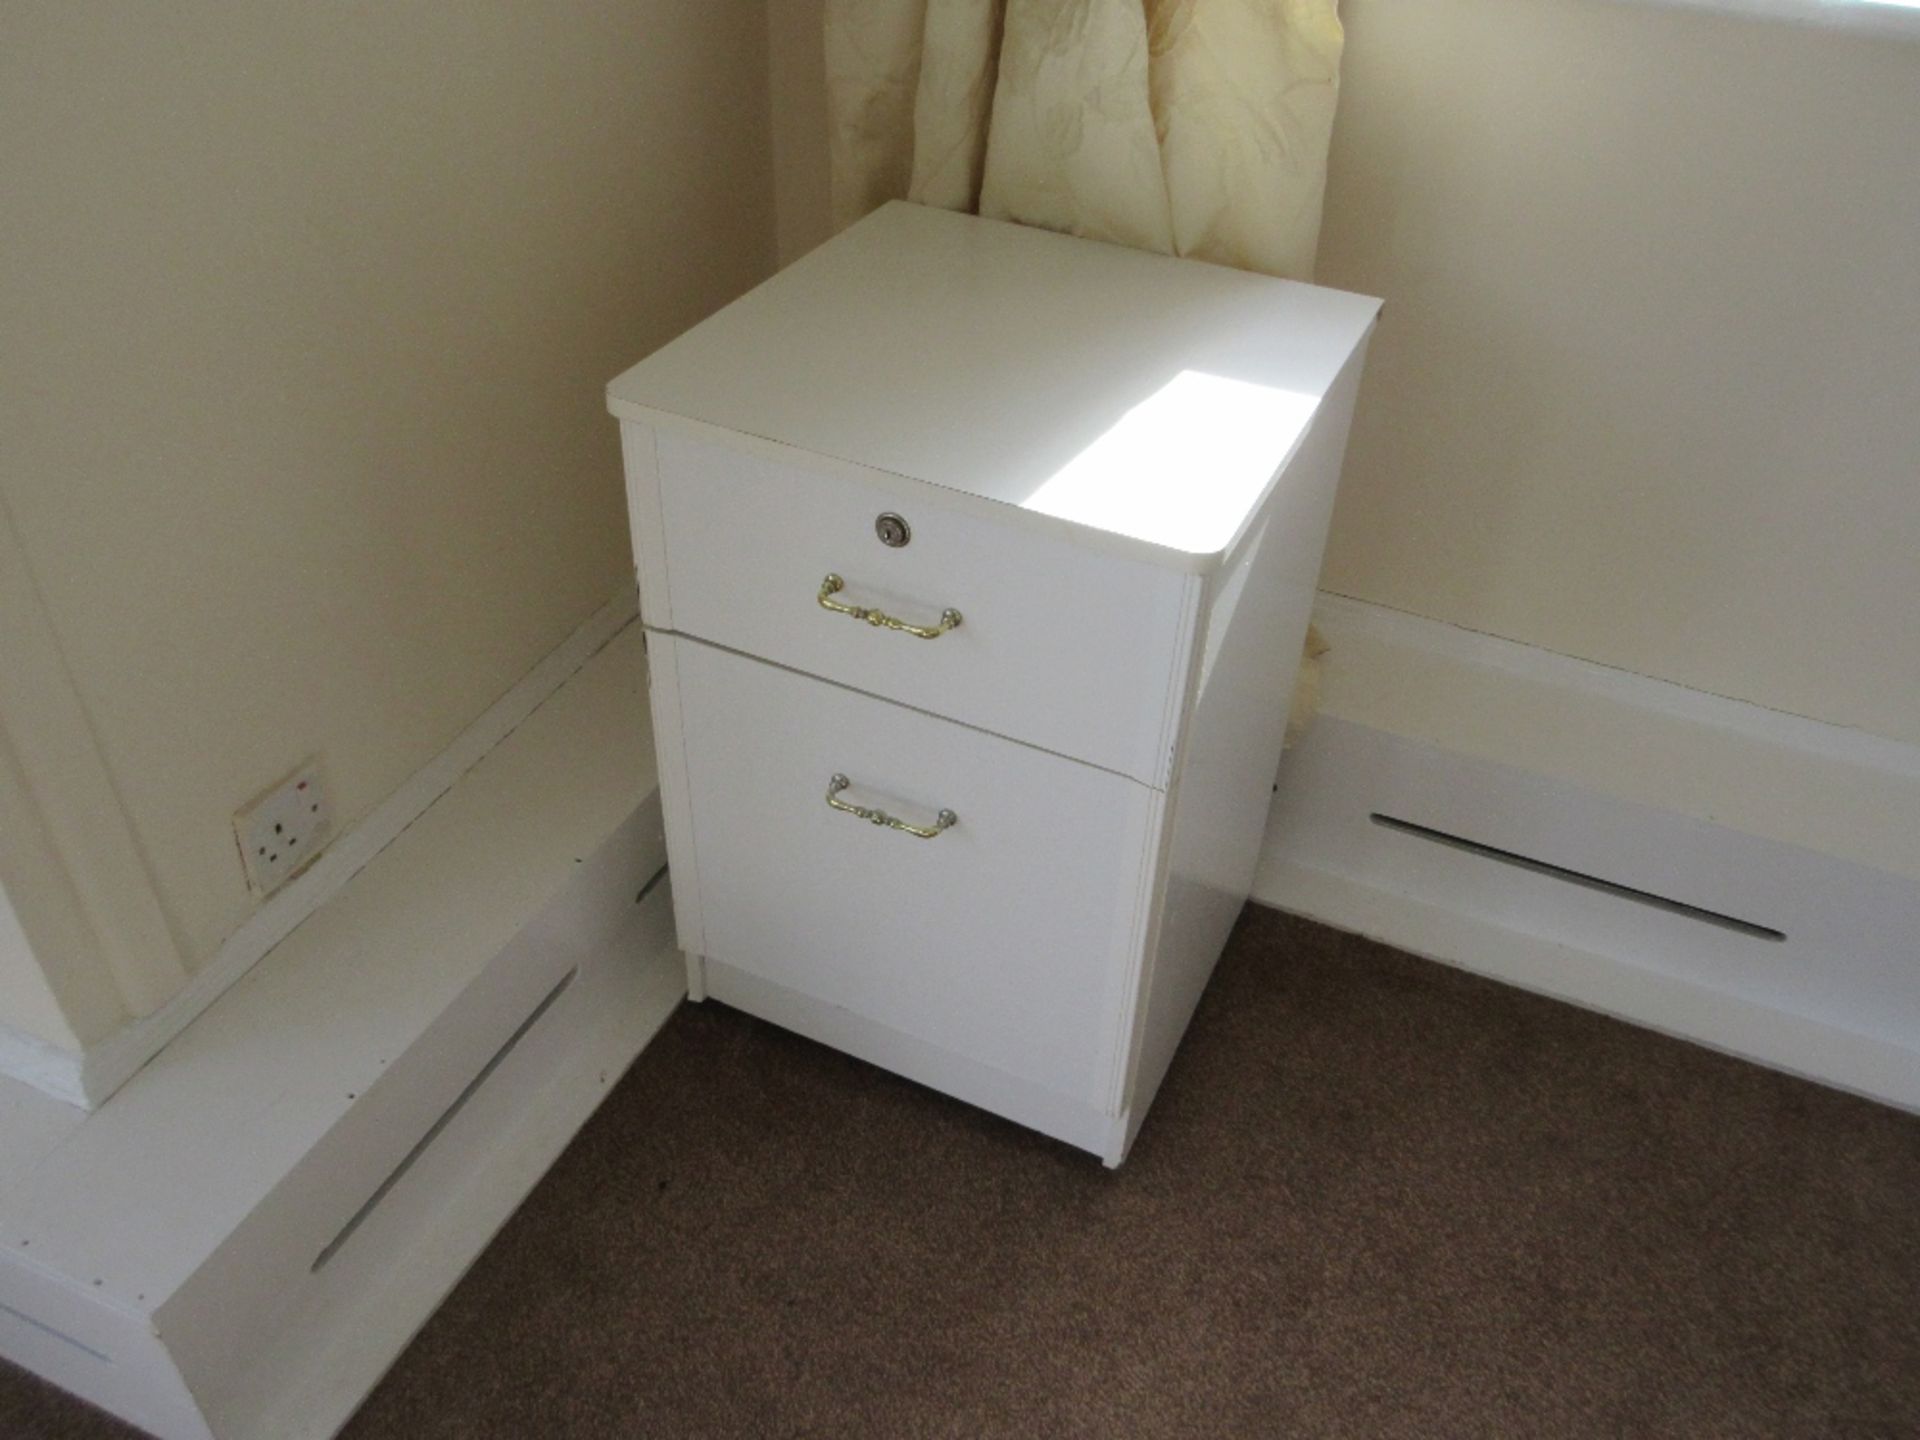 Contents of Room 19 to include: 2 bed base and mattress, 2 commodes, bedside table with 1 drawer, - Image 7 of 10